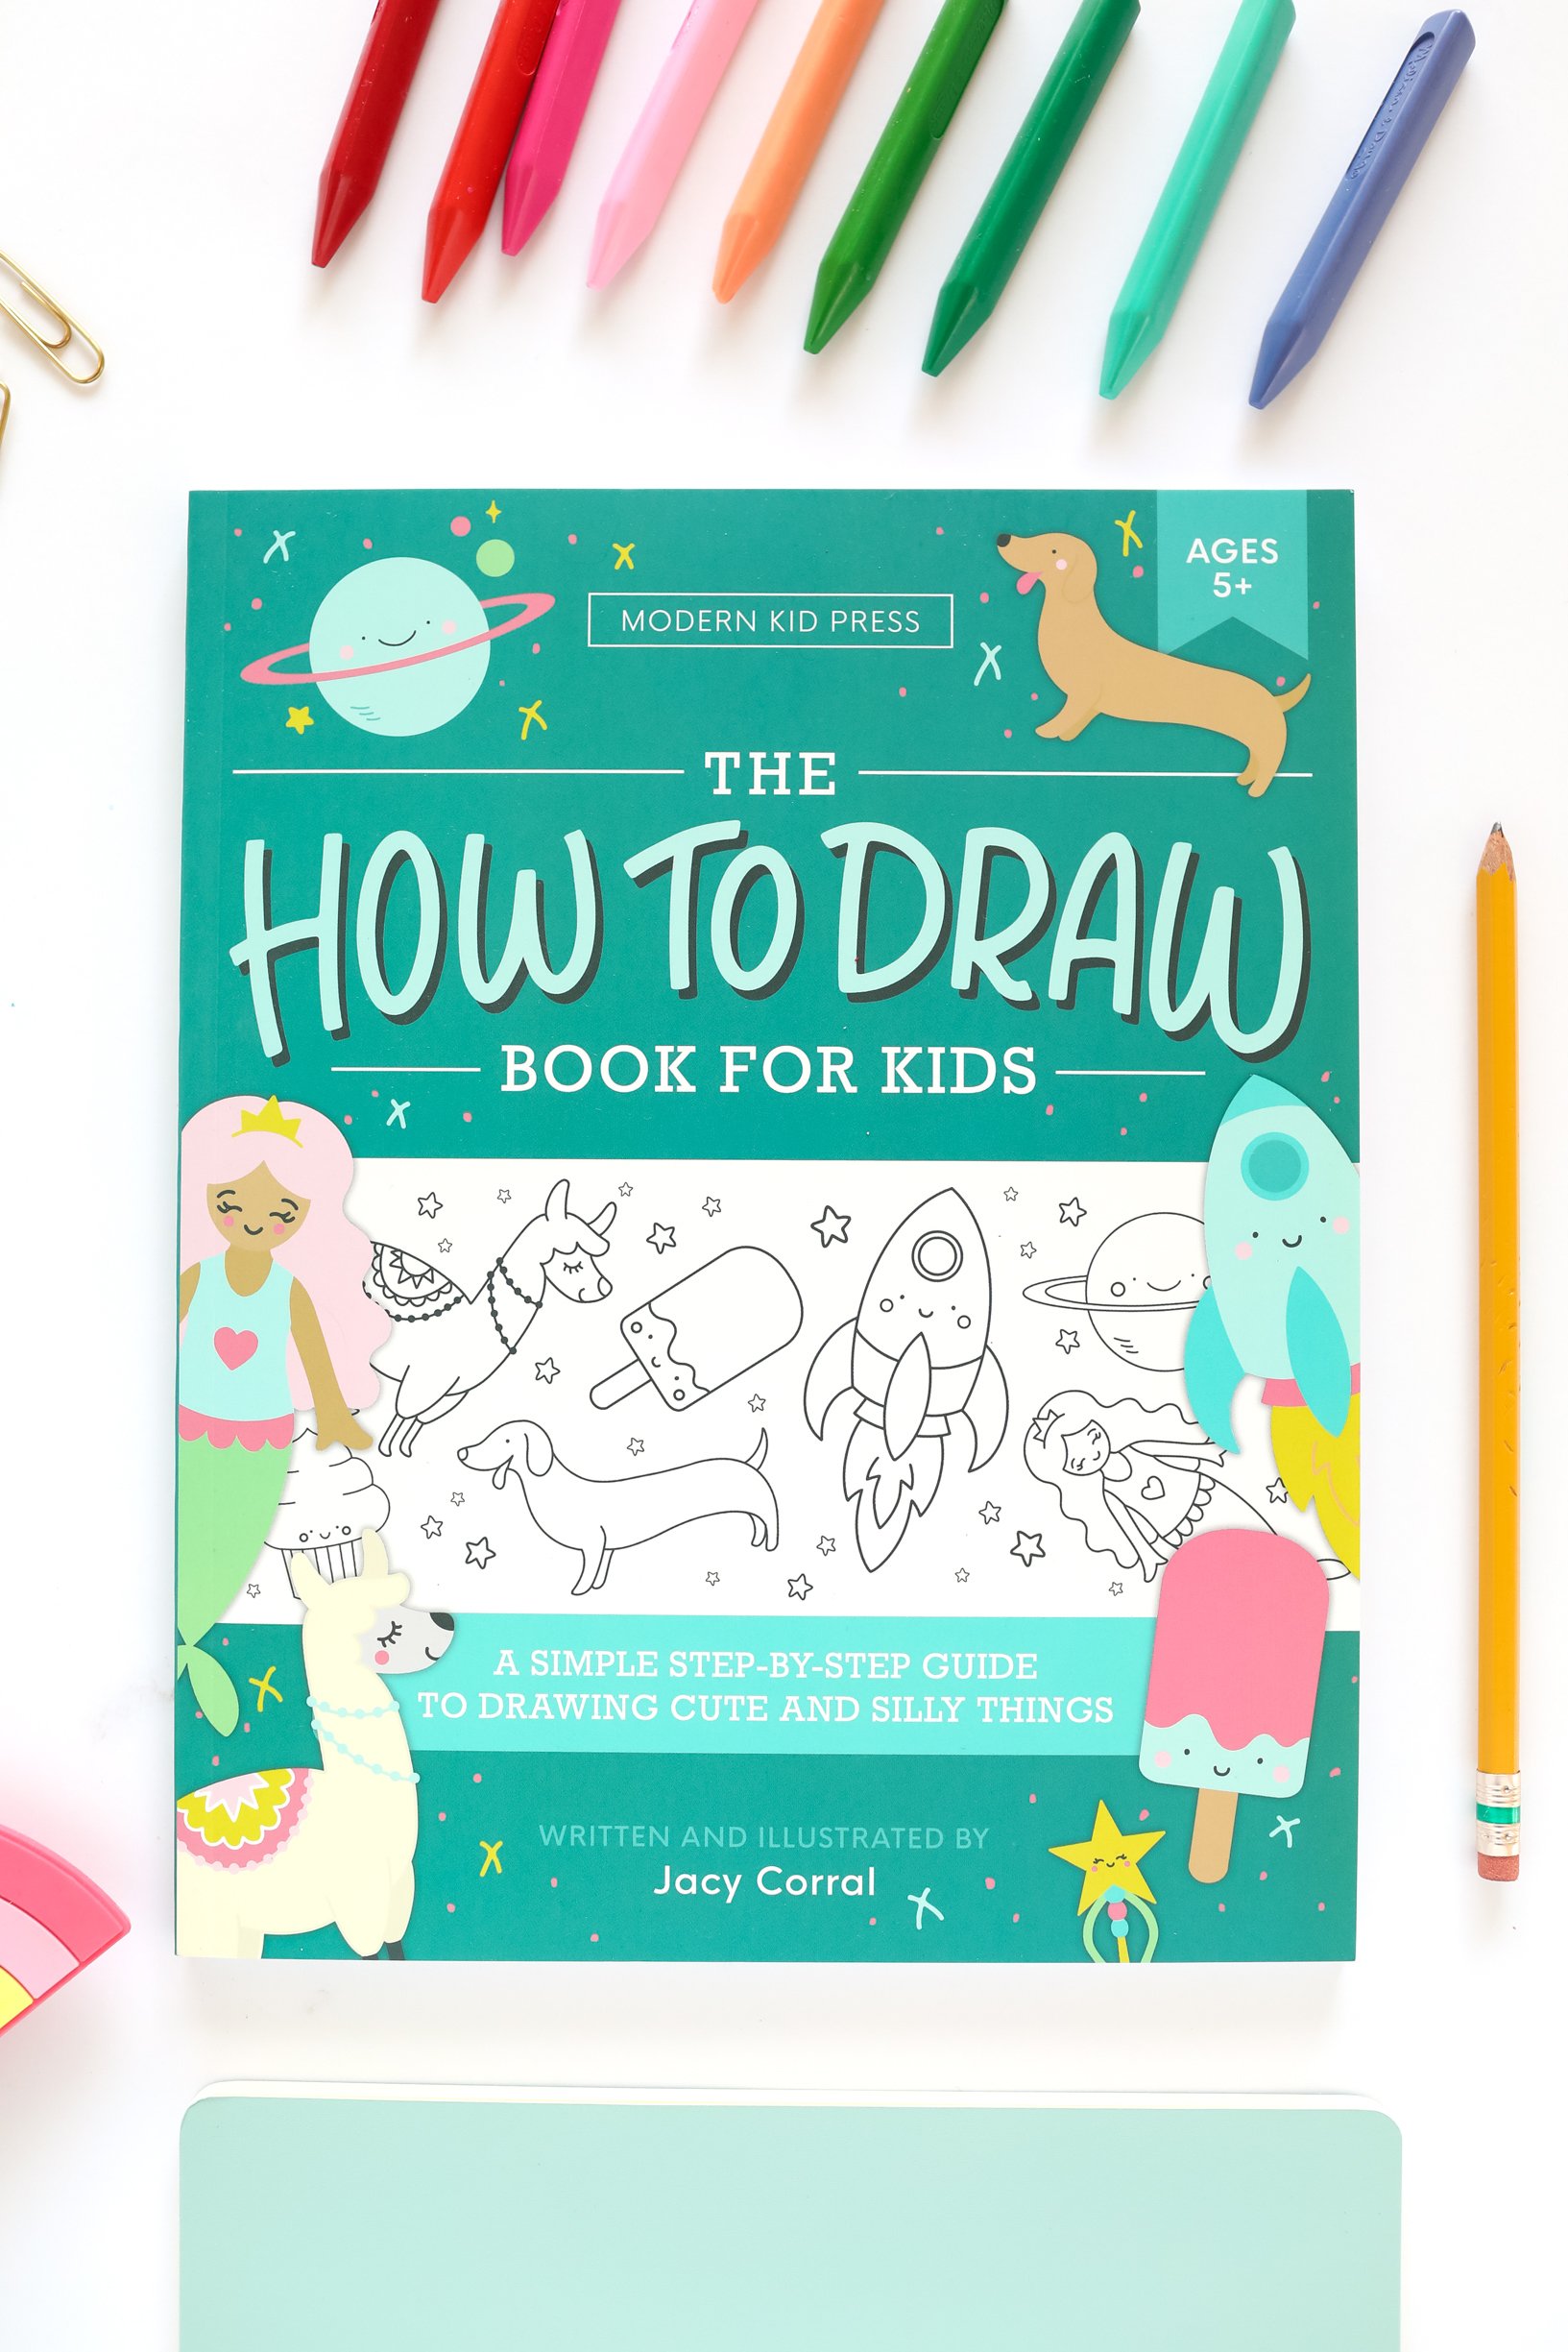 Bible Sketch Book: Fun Activity Workbook For Kids Ages 4-8 For Learning, Sketching, Drawing and Doodling